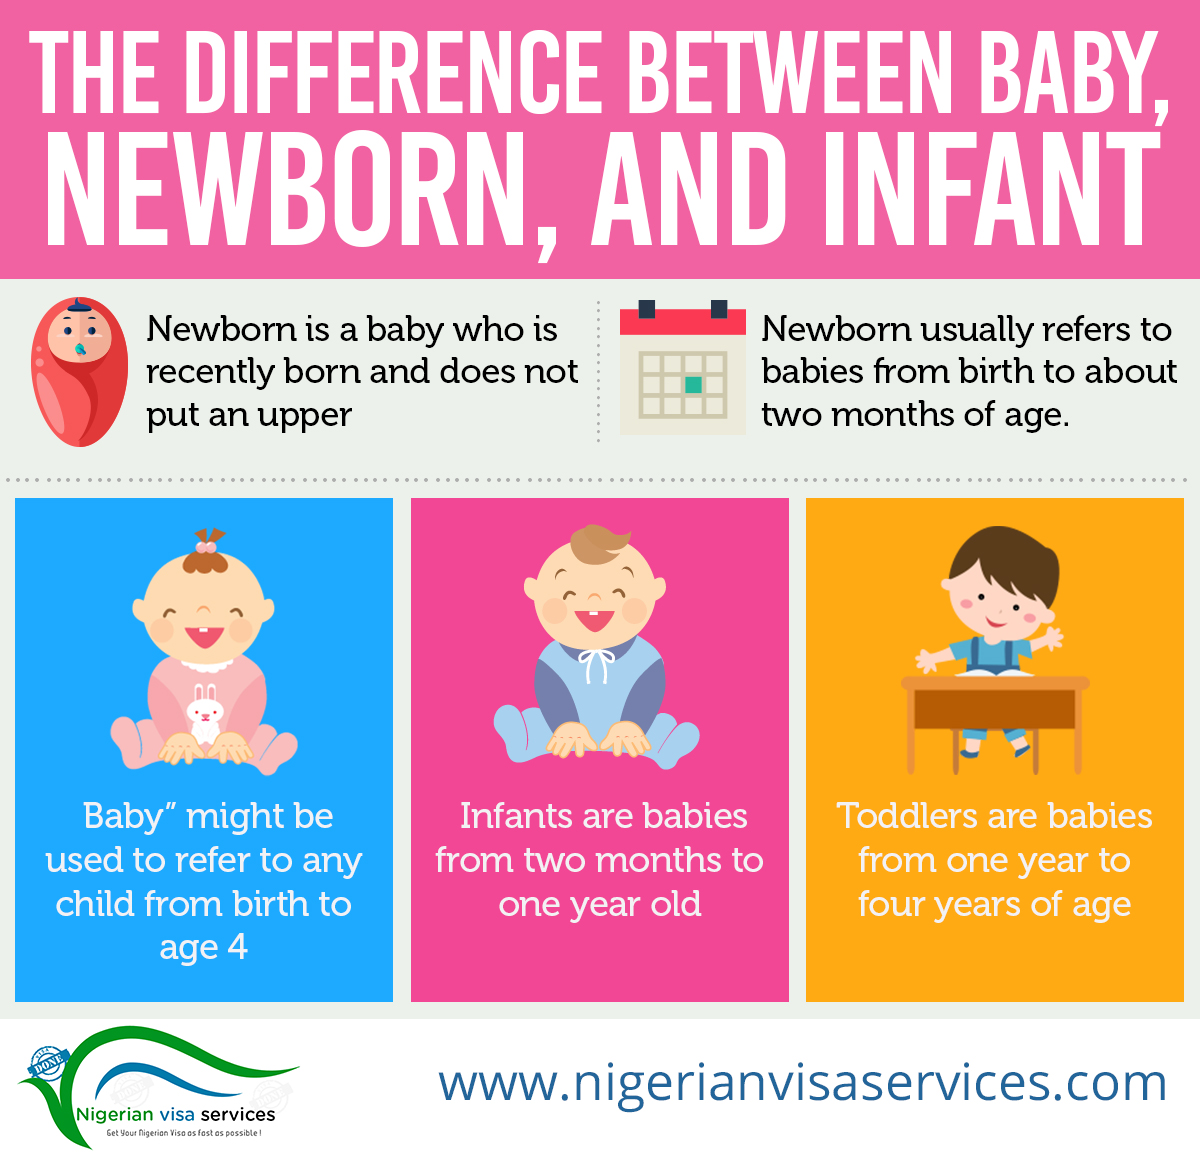 The Difference Between Baby, Newborn, and Infant